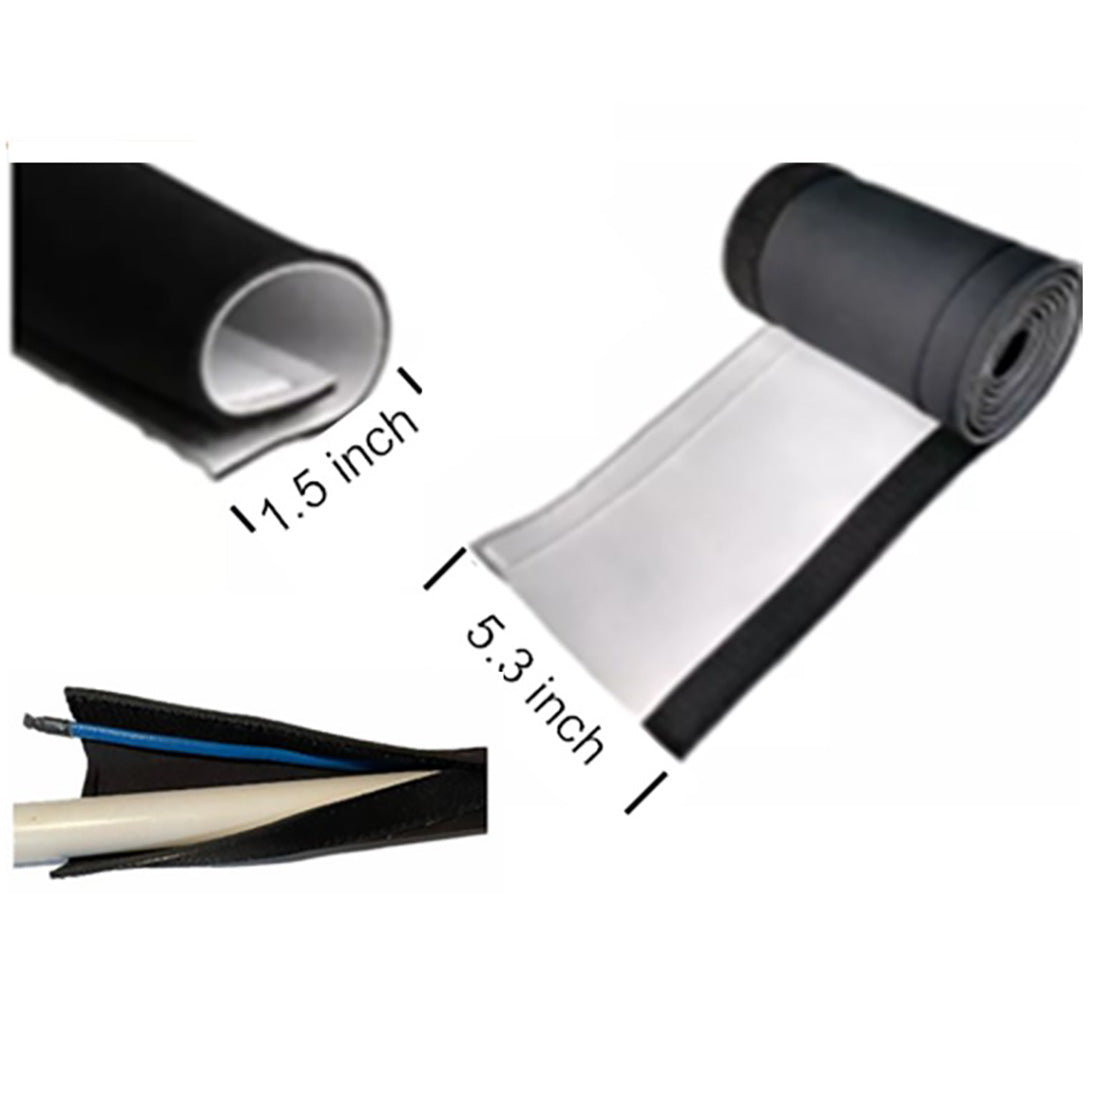 SmartWrap Neoprene Pipe/Heat Cable Covering Material. Sold by the foot.